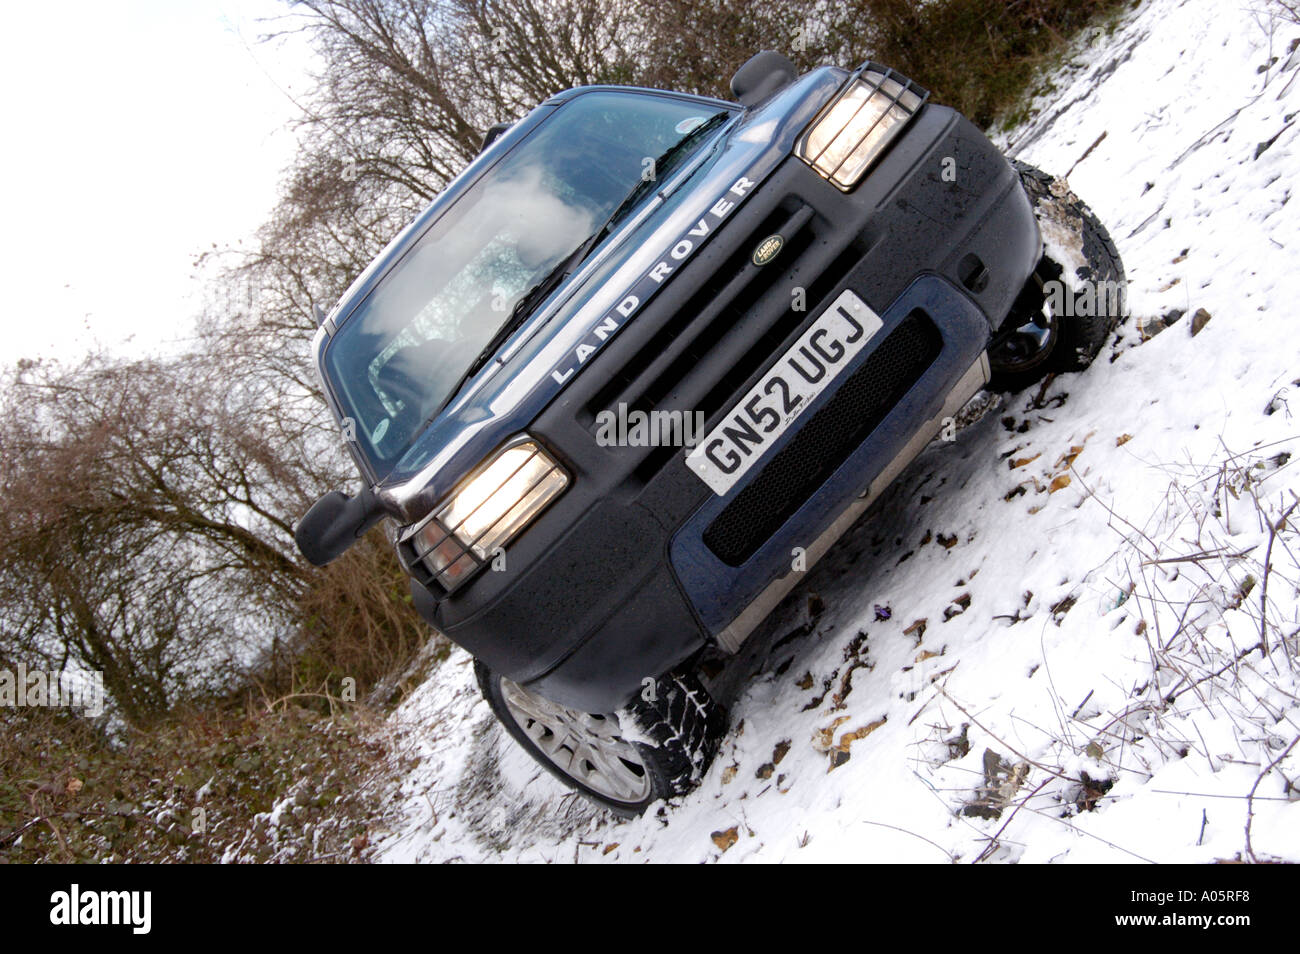 Land Rover Freelander in snow covered forest clearing Kent England Stock Photo